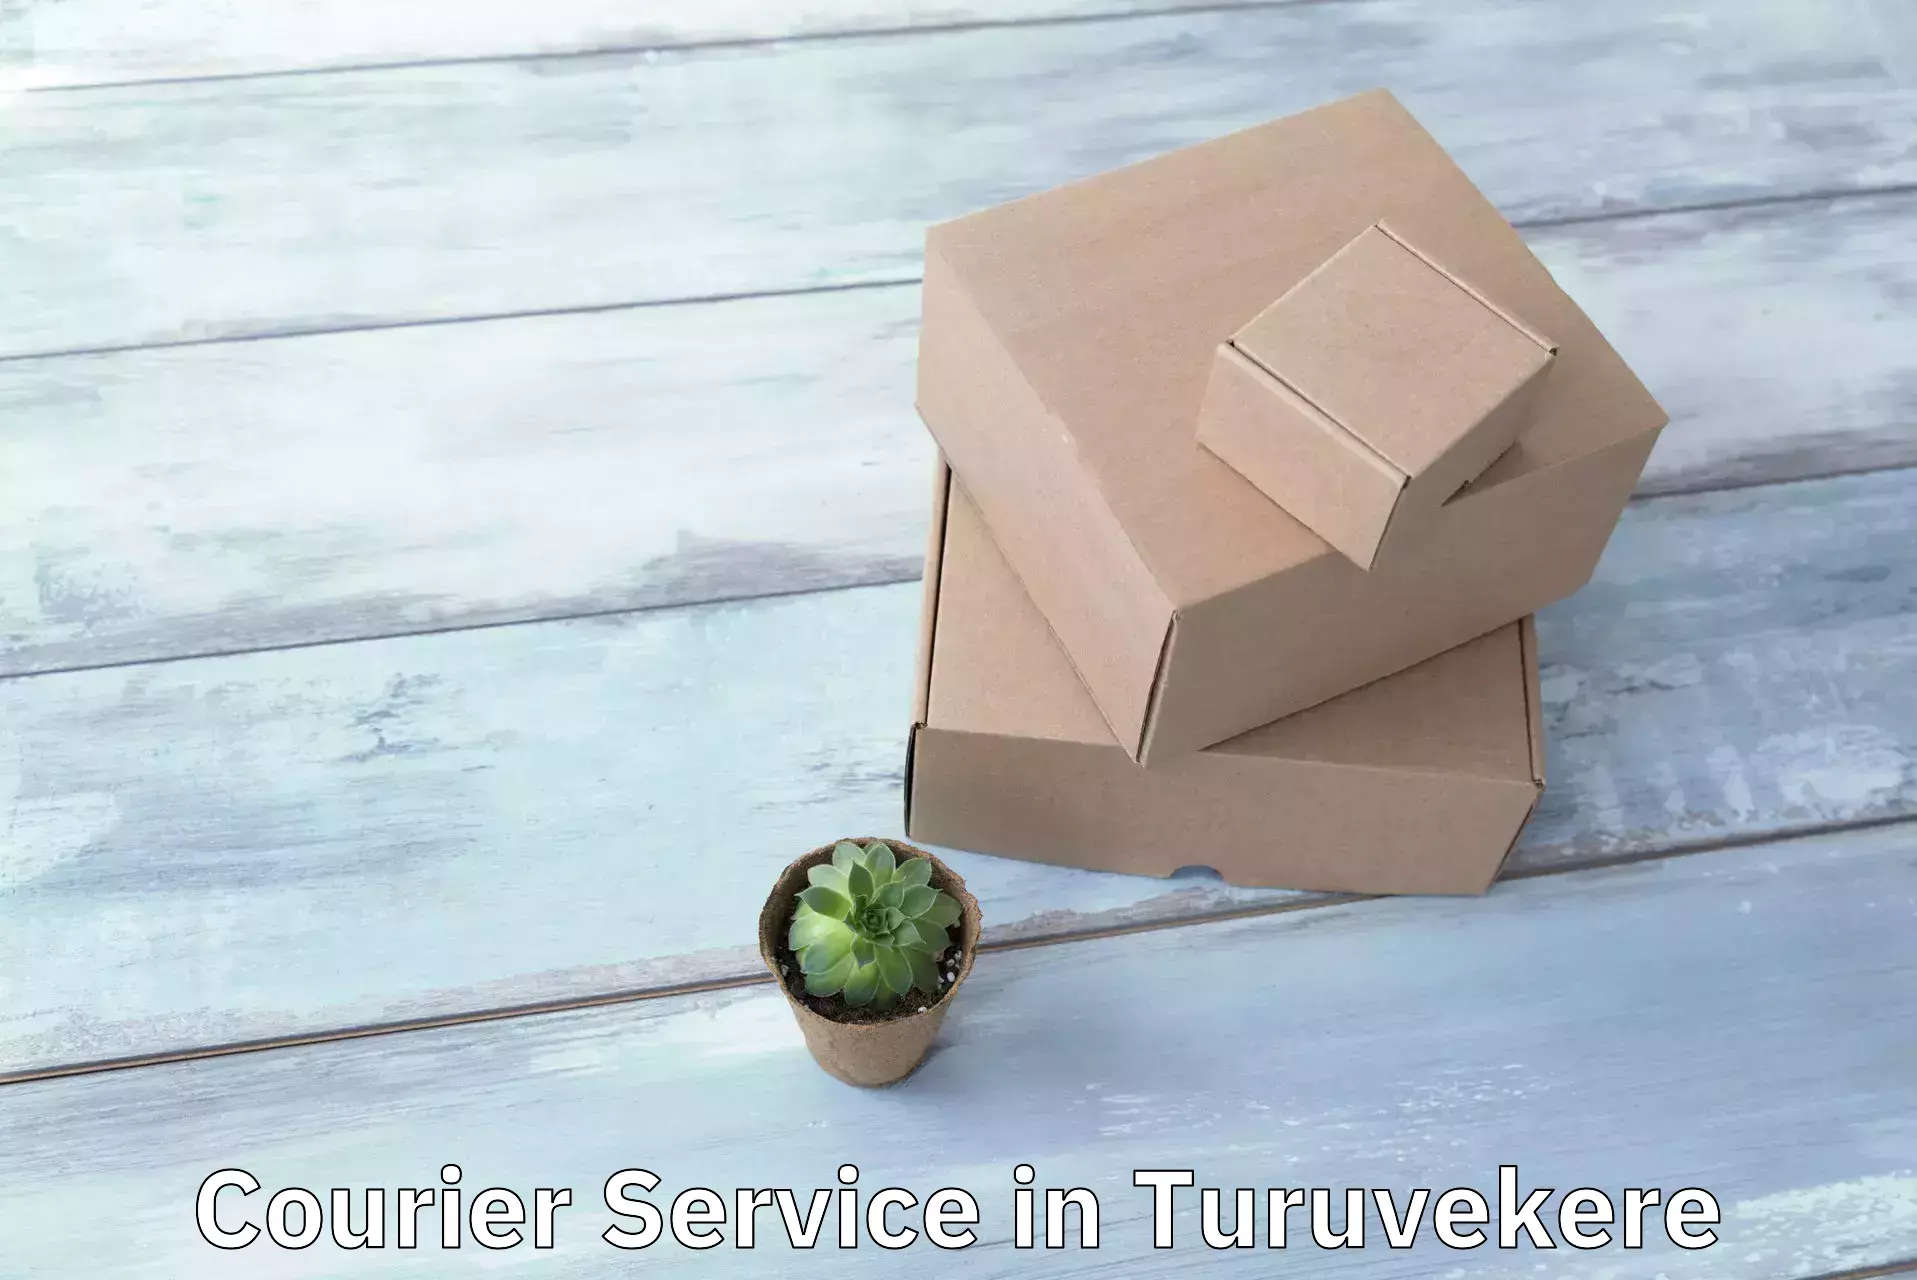 Efficient order fulfillment in Turuvekere